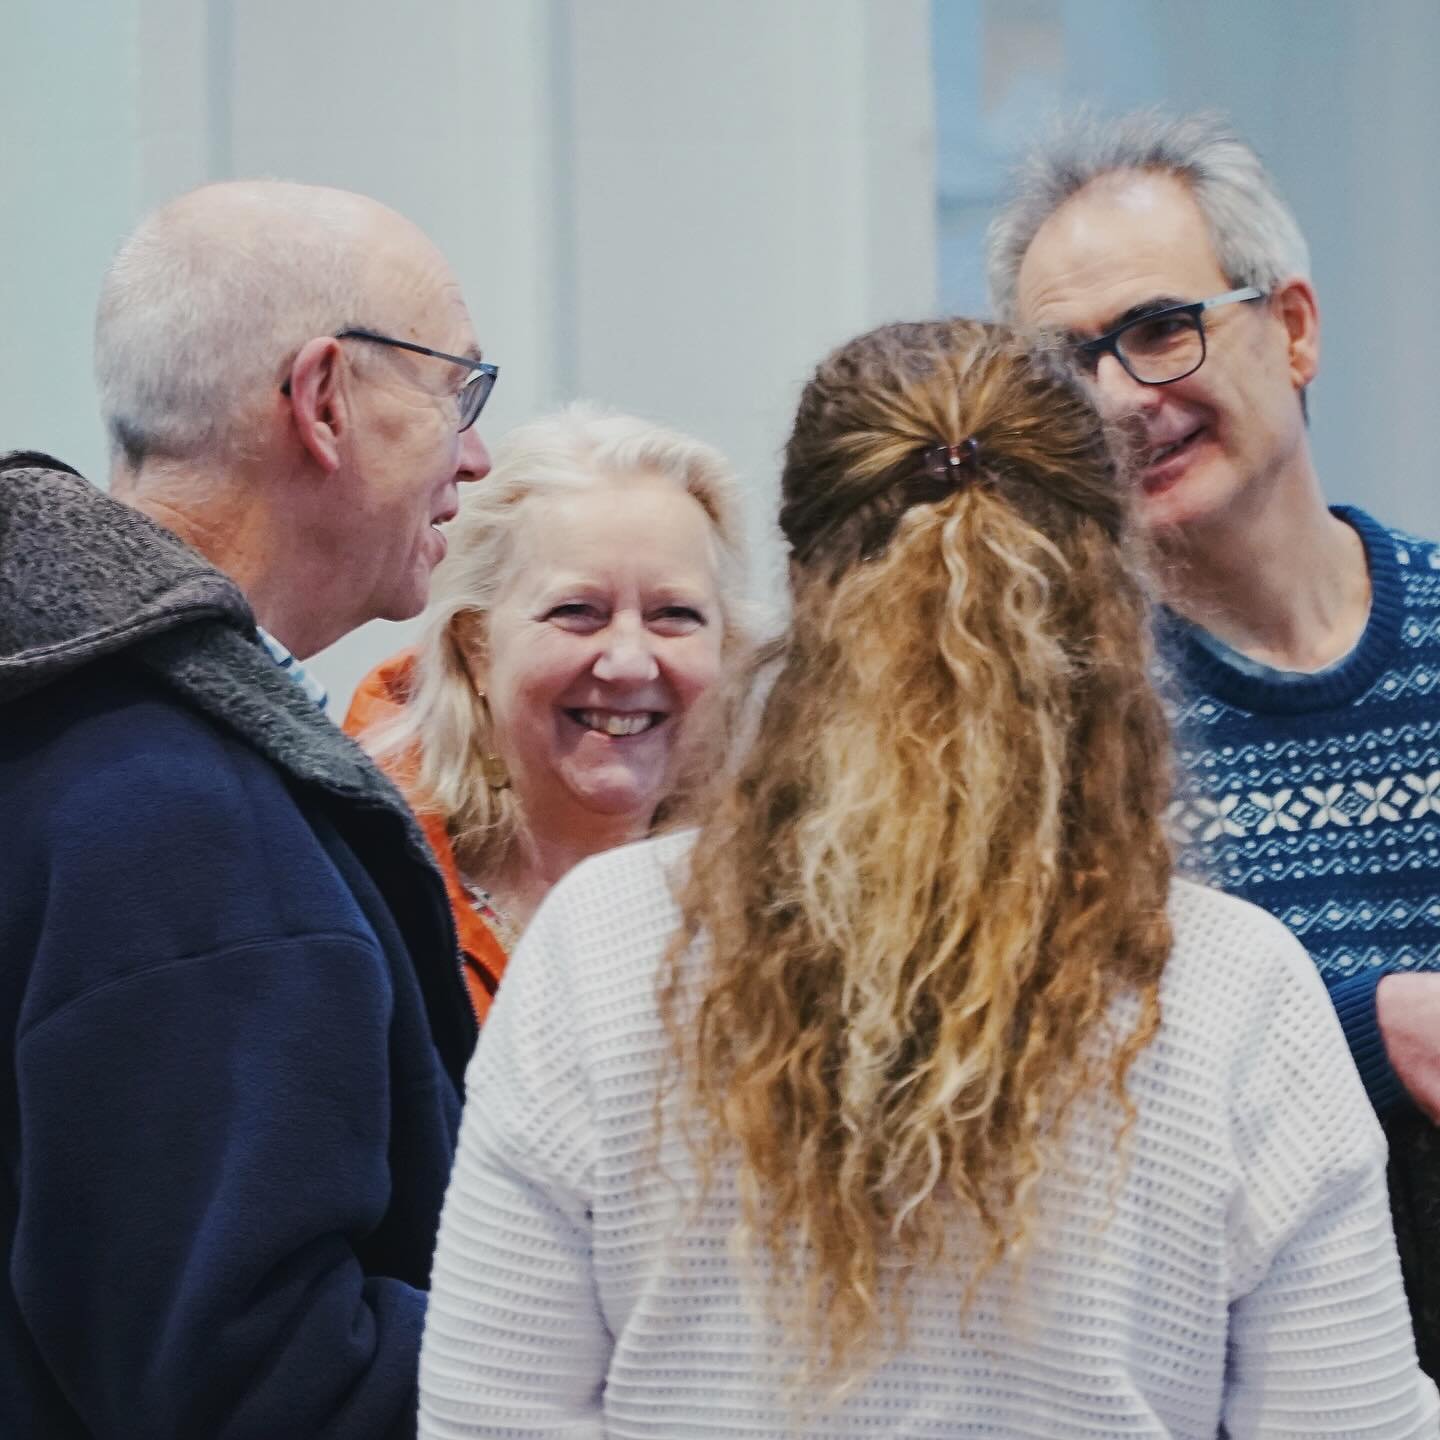 Are you new around here? 👋🏼☕️ We&rsquo;d love to meet you! 

Join some of our staff after the 9:30 AM service this upcoming Sunday for a coffee and an informal &ldquo;get-to-know-you&rdquo; chat over tea/coffee and pastries.

#HTCambridge #ChurchIn